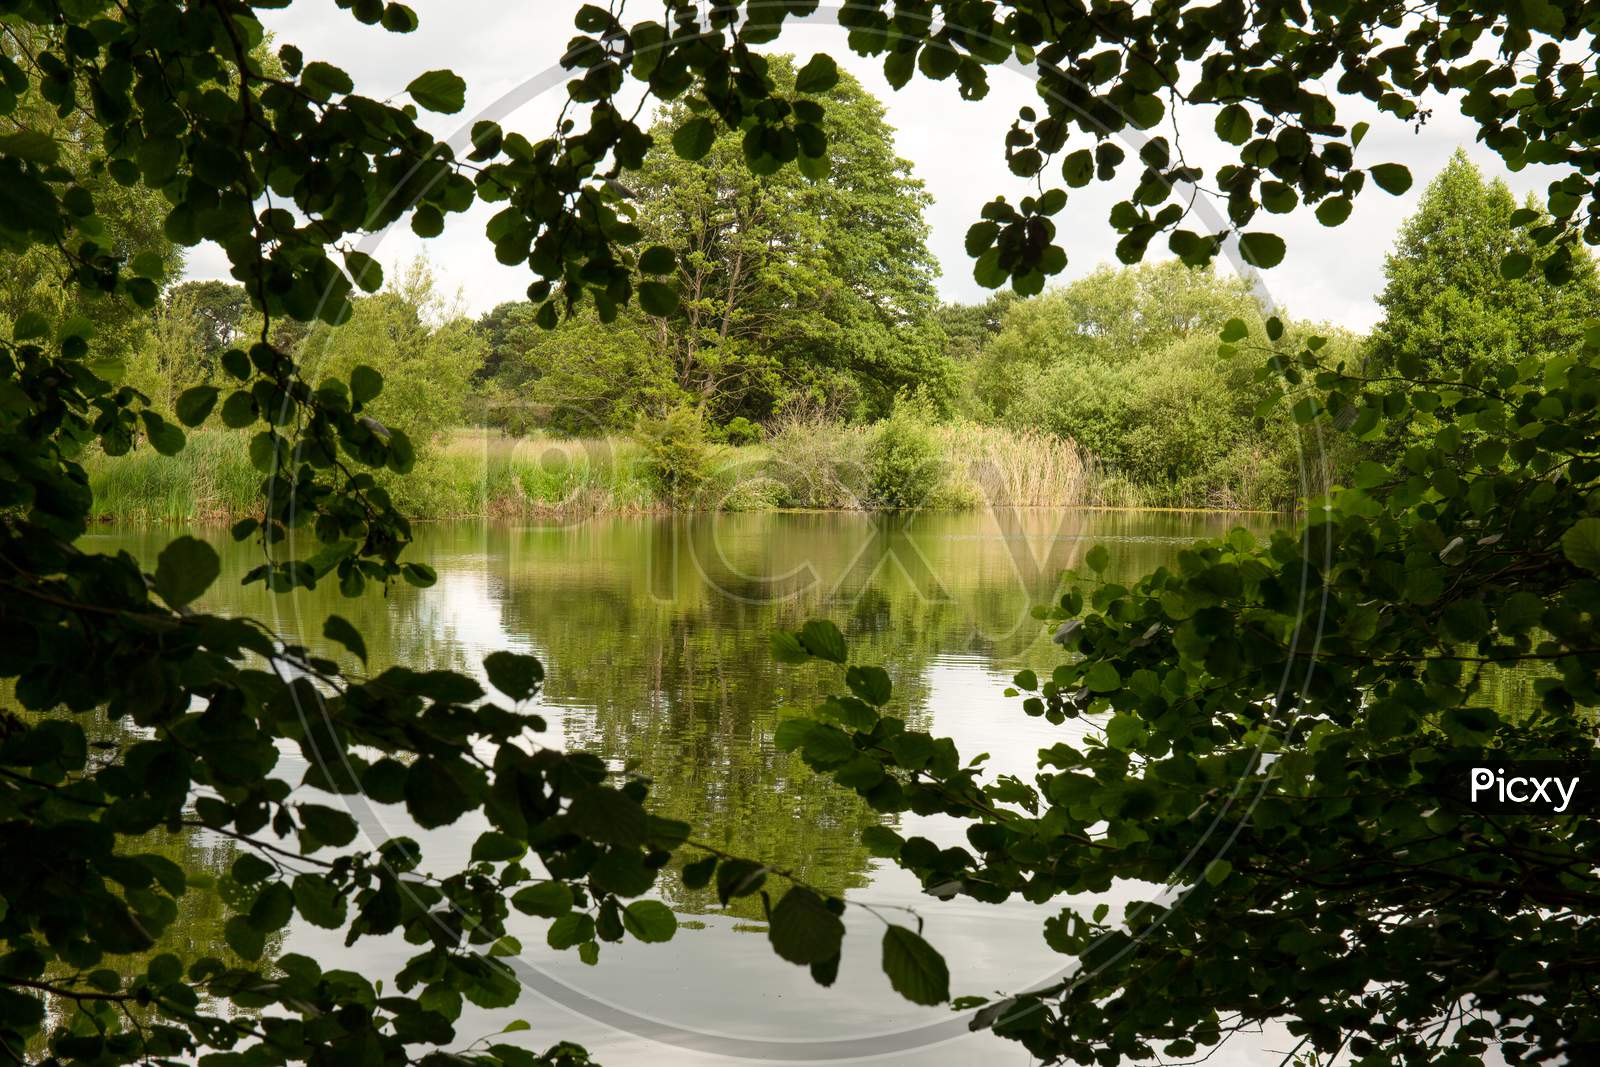 Lake Reflection Through Leaves - Spring, Summers Season In England. Concept Of Nature Hidden Delight